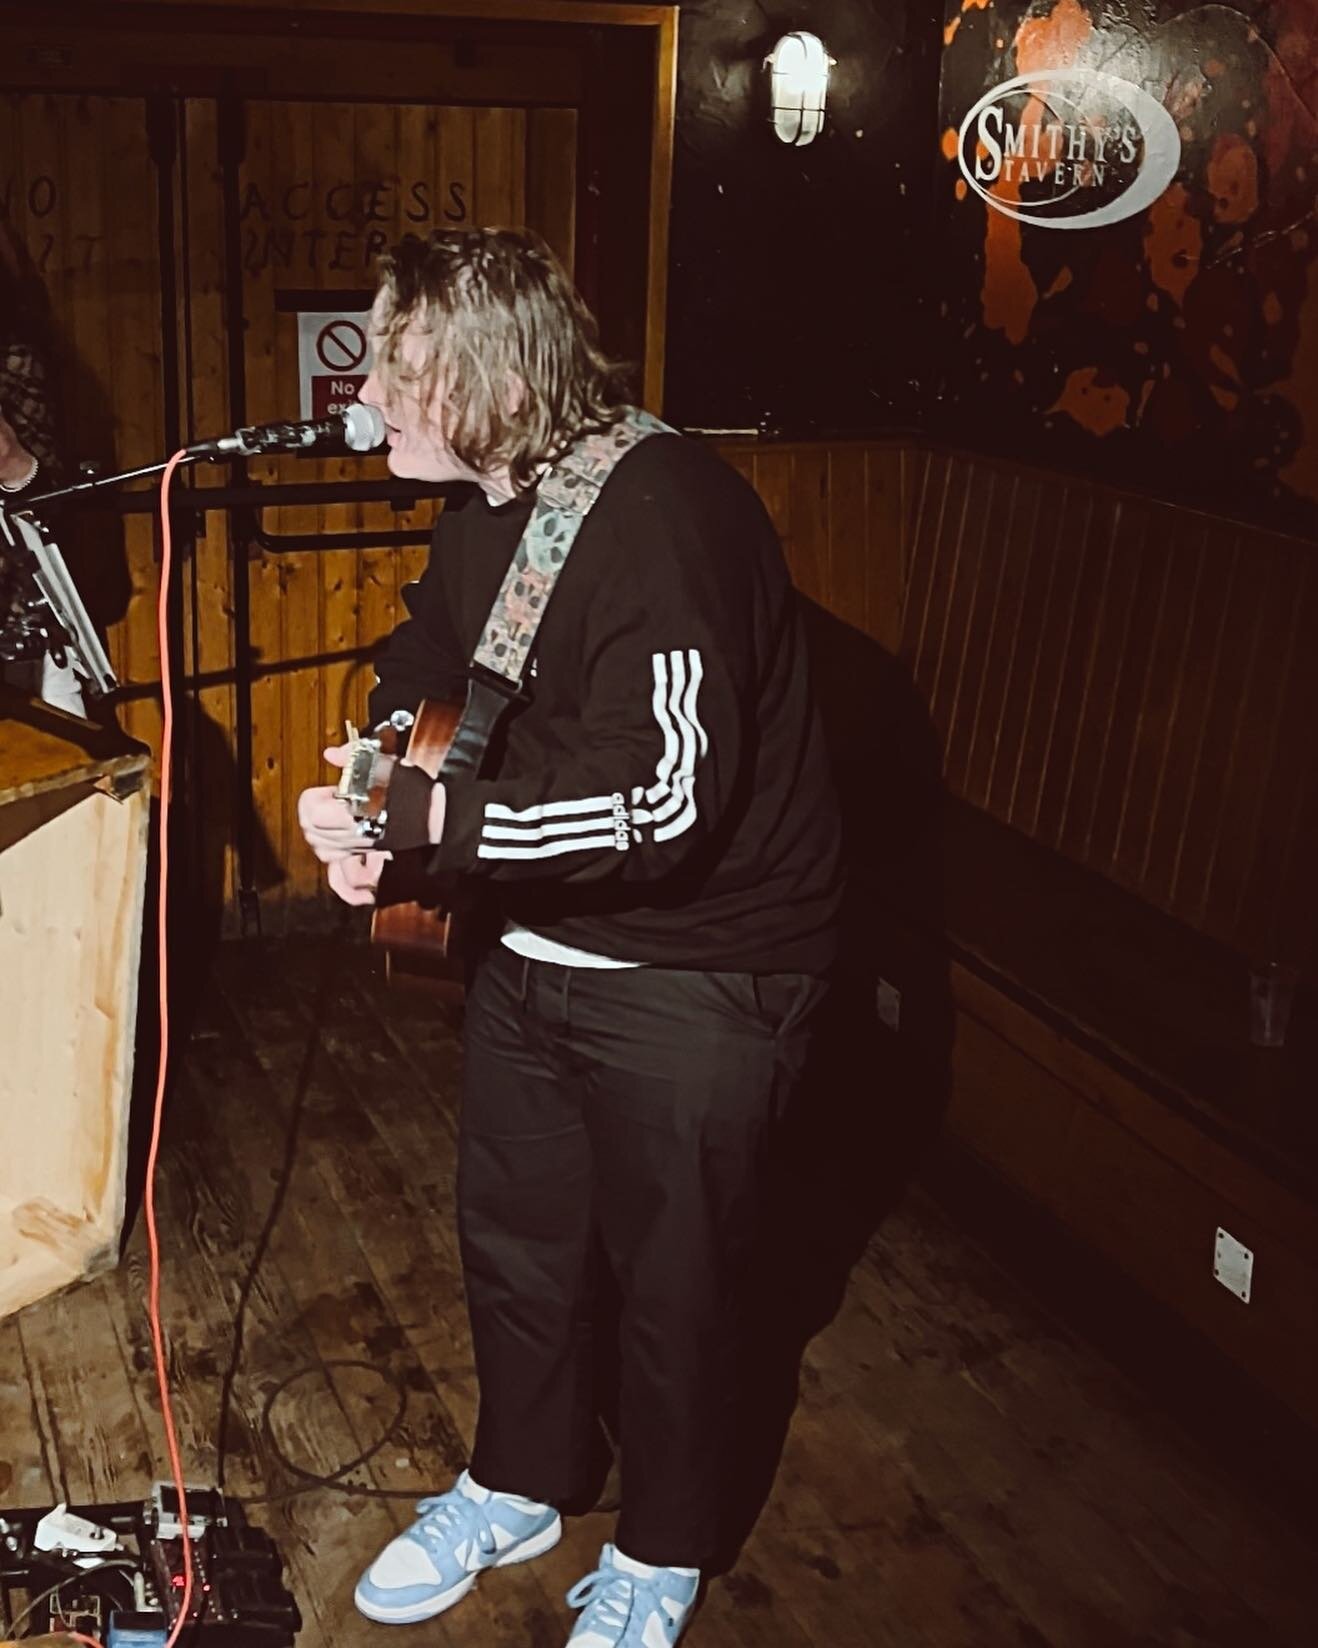 This one time, in Smithy&rsquo;s, Lewis Capaldi gave a surprise performance 🎤 #lesdeuxalpes #les2alpes #lewiscapaldi